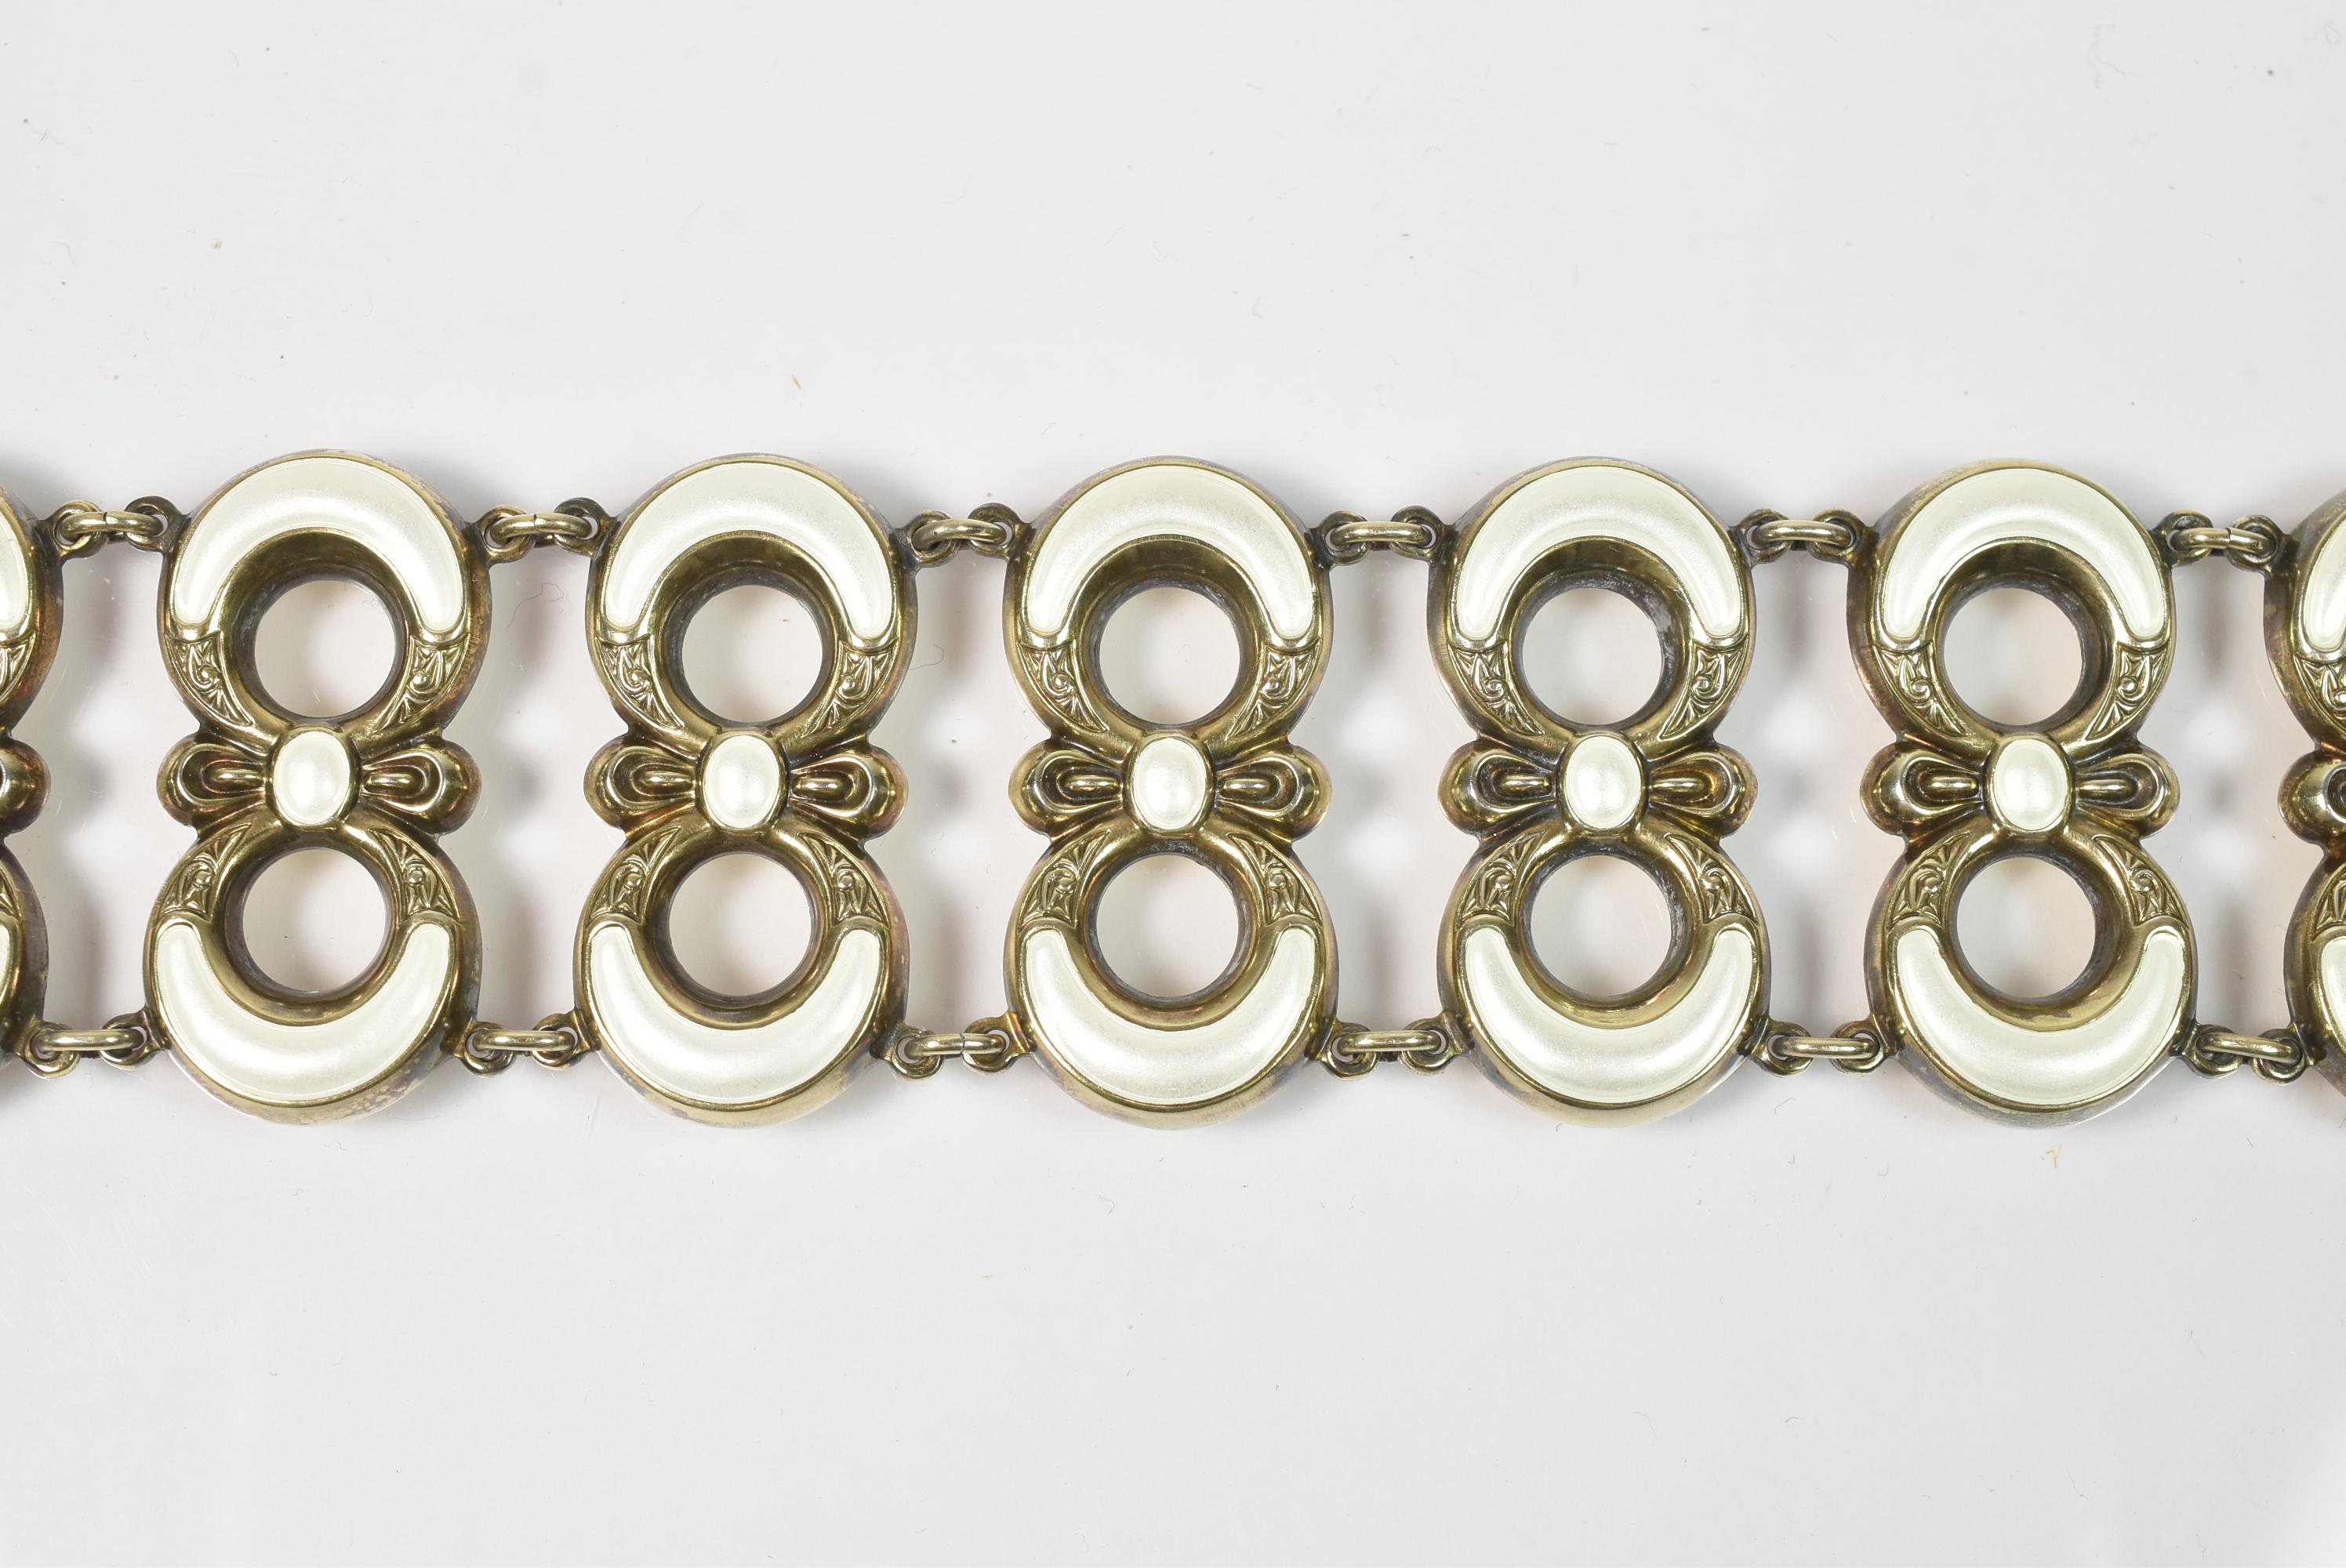 Vintage gilded sterling silver and white or pearl tone enamel figure eight links bracelet with 